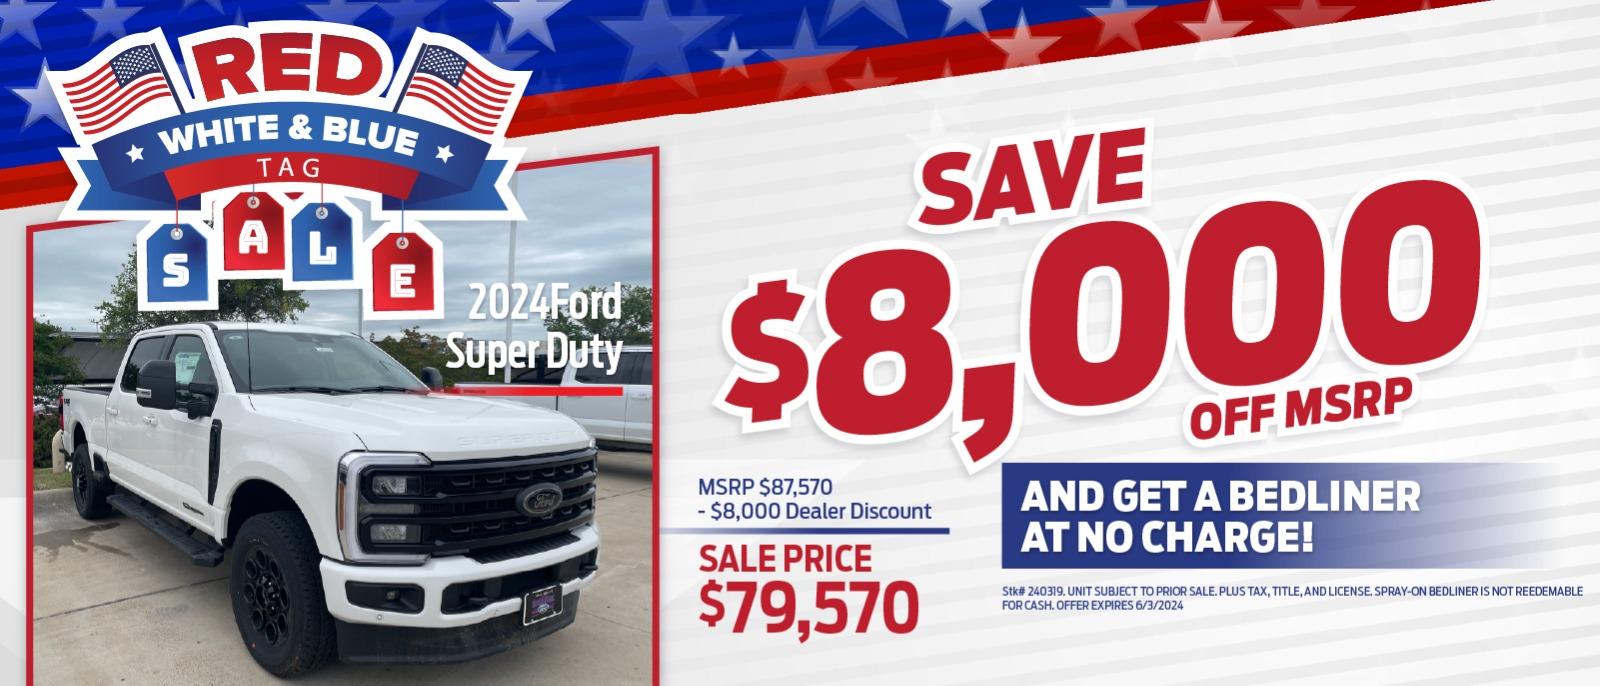 2024 Ford Super-Duty
Save $9,000 Off MSRP